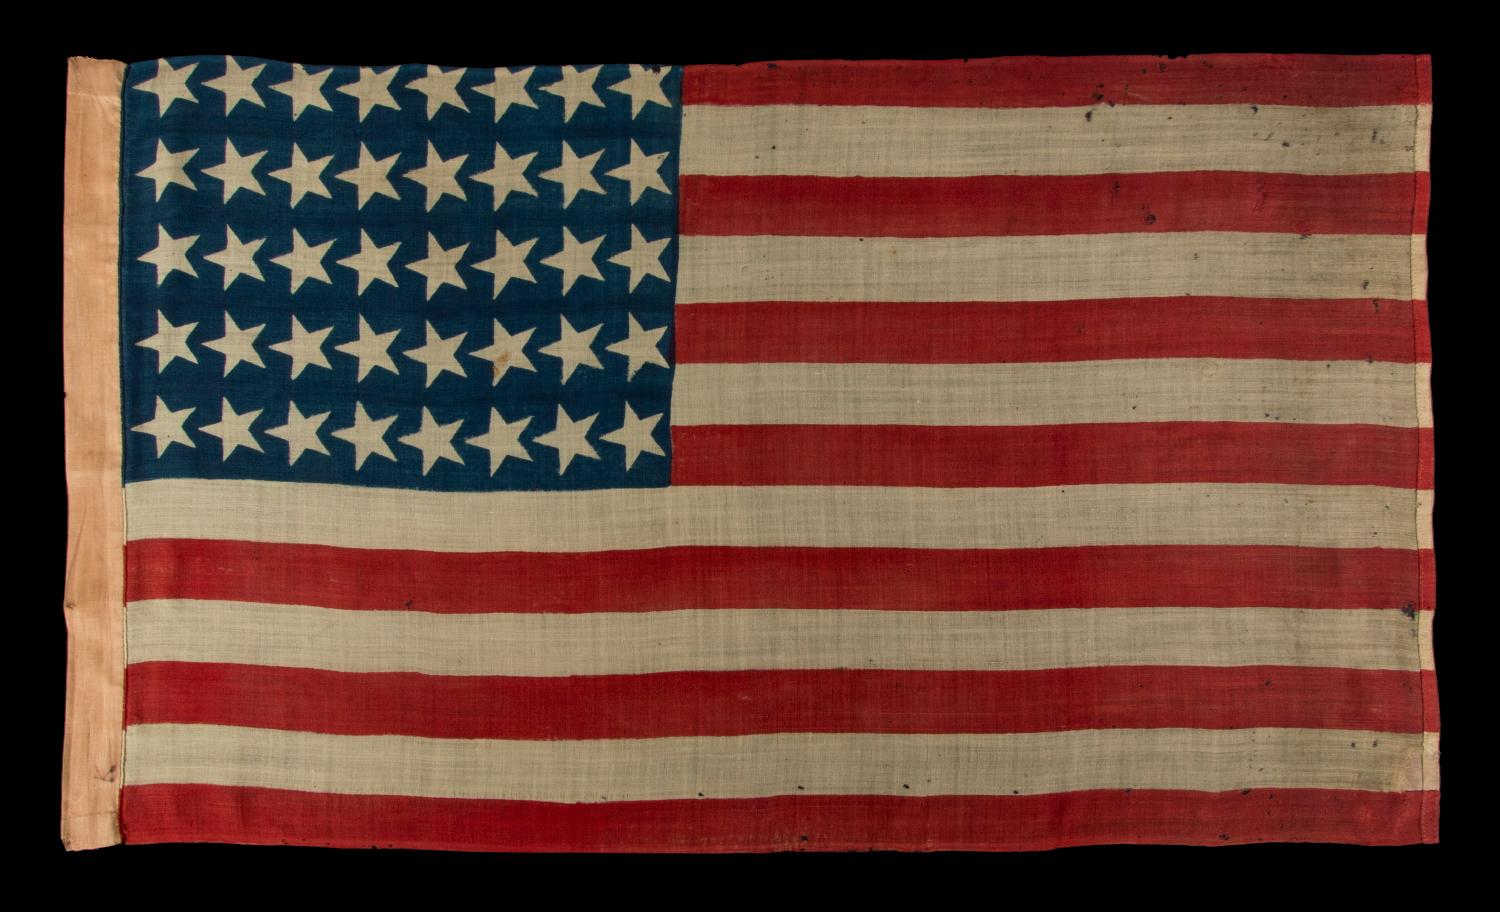 40 CANTED STARS IN AN ORDERLY PHALANX, ON AN ANTIQUE AMERICAN FLAG WITH A RARE STAR COUNT, ACCURATE FOR JUST SIX DAYS AND NEVER OFFICIAL, REFLECTING SOUTH DAKOTA'S ADMISSION TO THE UNION:

40 star American national flag, clamp-dyed on wool bunting,